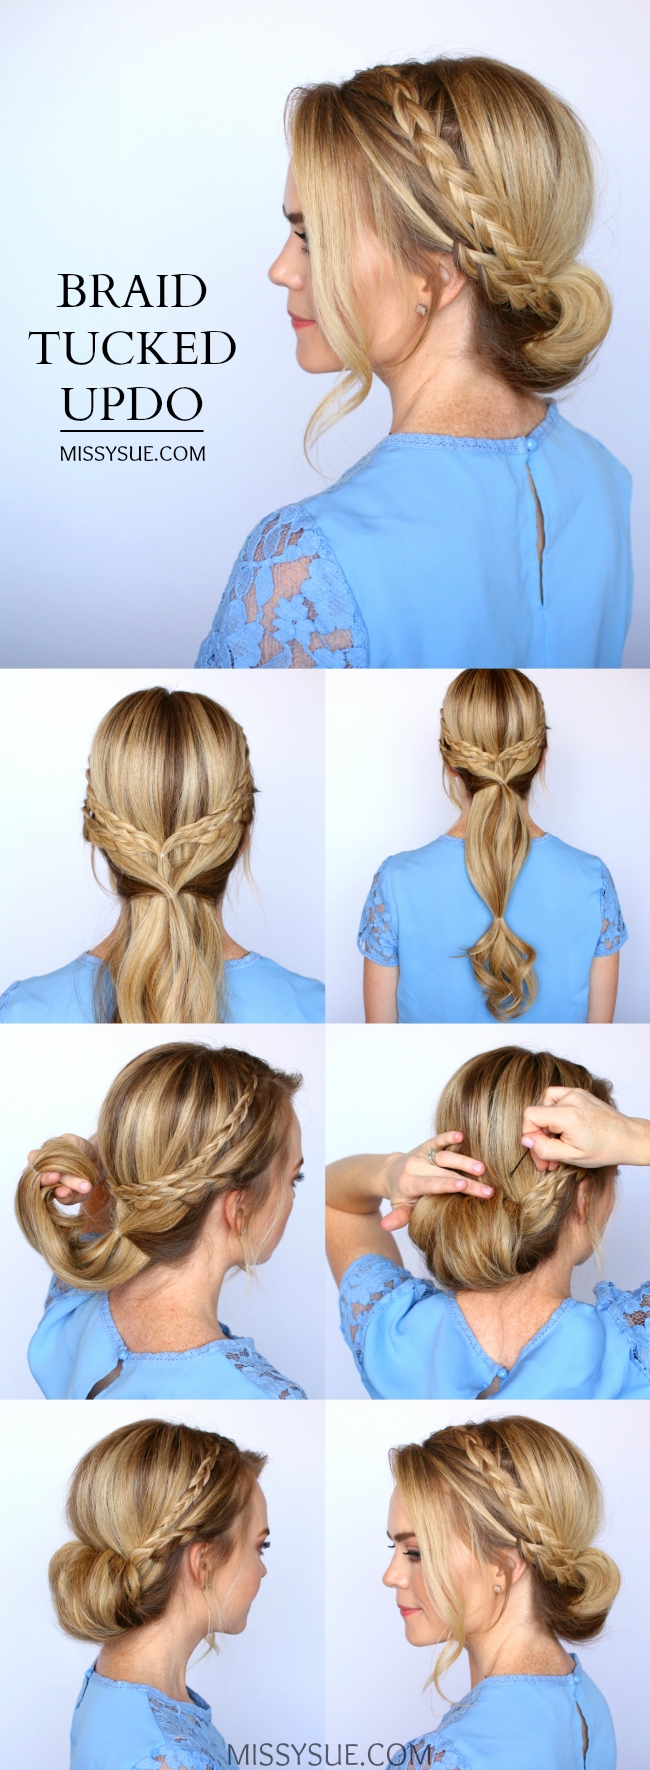 braid-tucked-updo-hairstyle